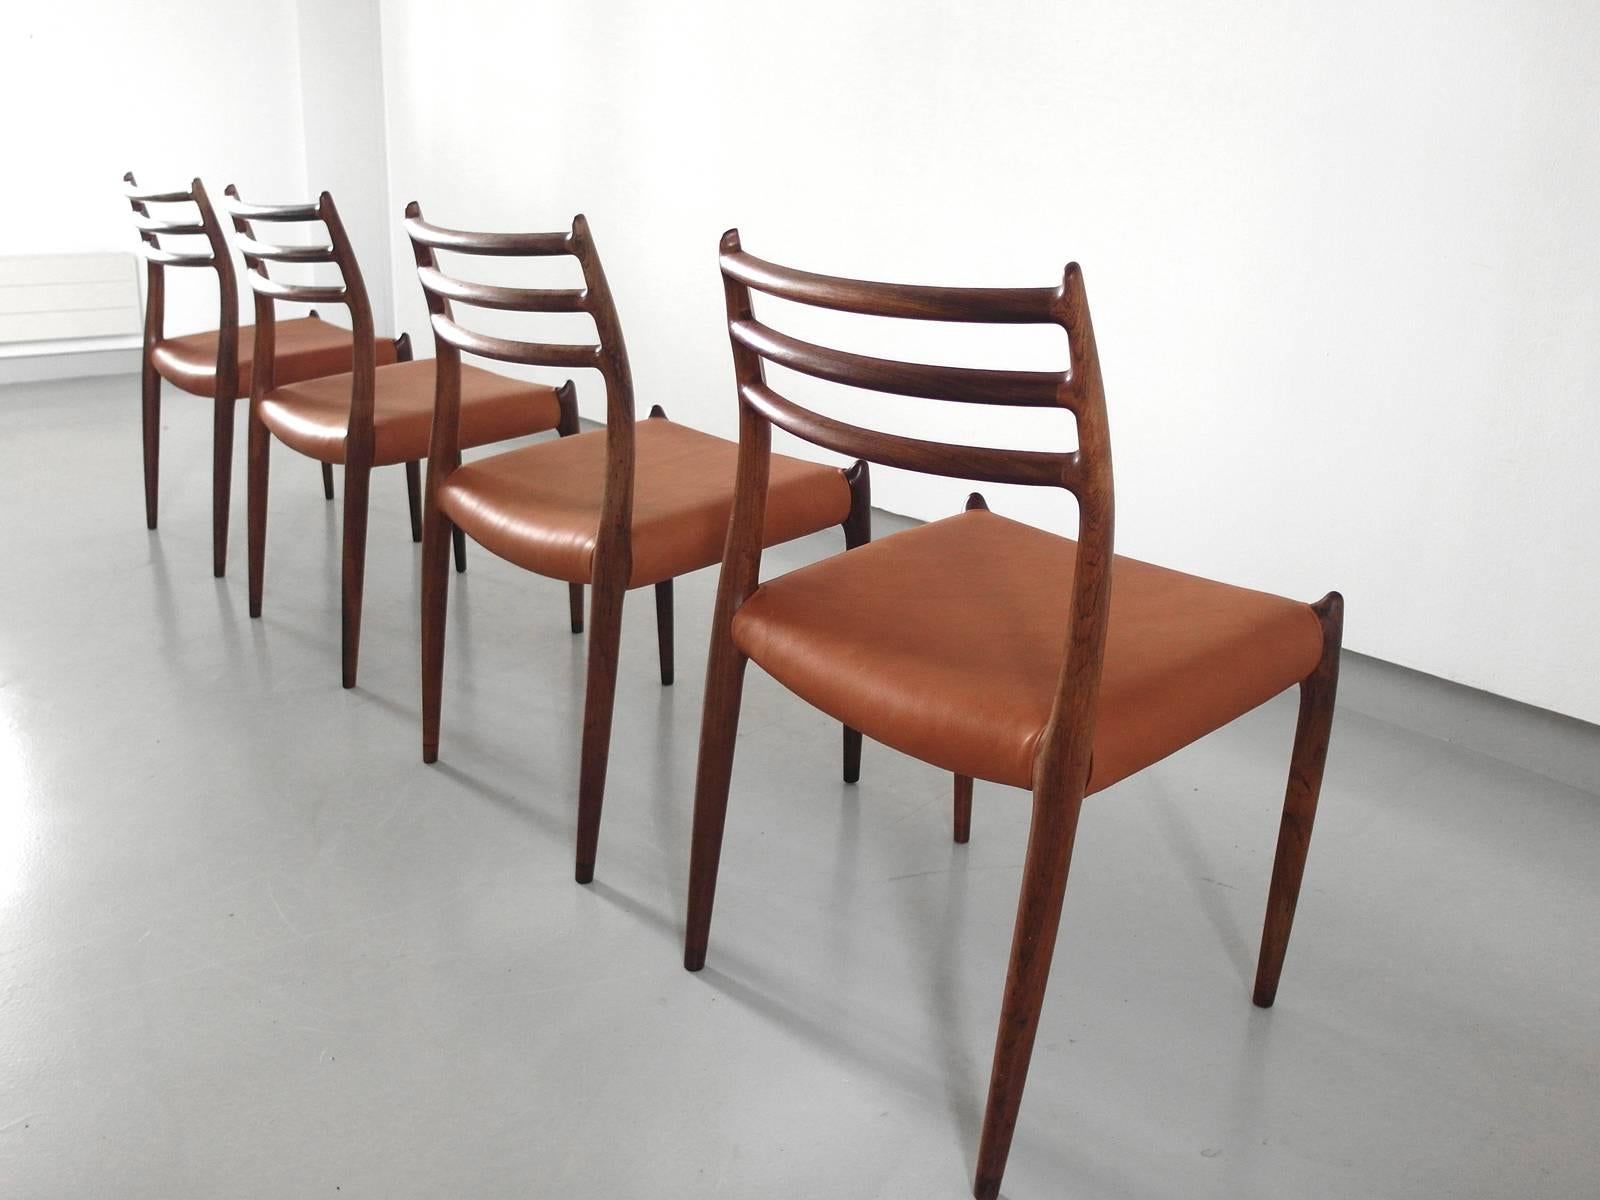 Set of four elegant sculptural dining chairs Model 78 designed by Niels Otto Møller for J.L Møller, Denmark, circa 1965. The premium quality organic frames are made of rosewood. The seats are reupholstered in cognac brown leather. The Model 78